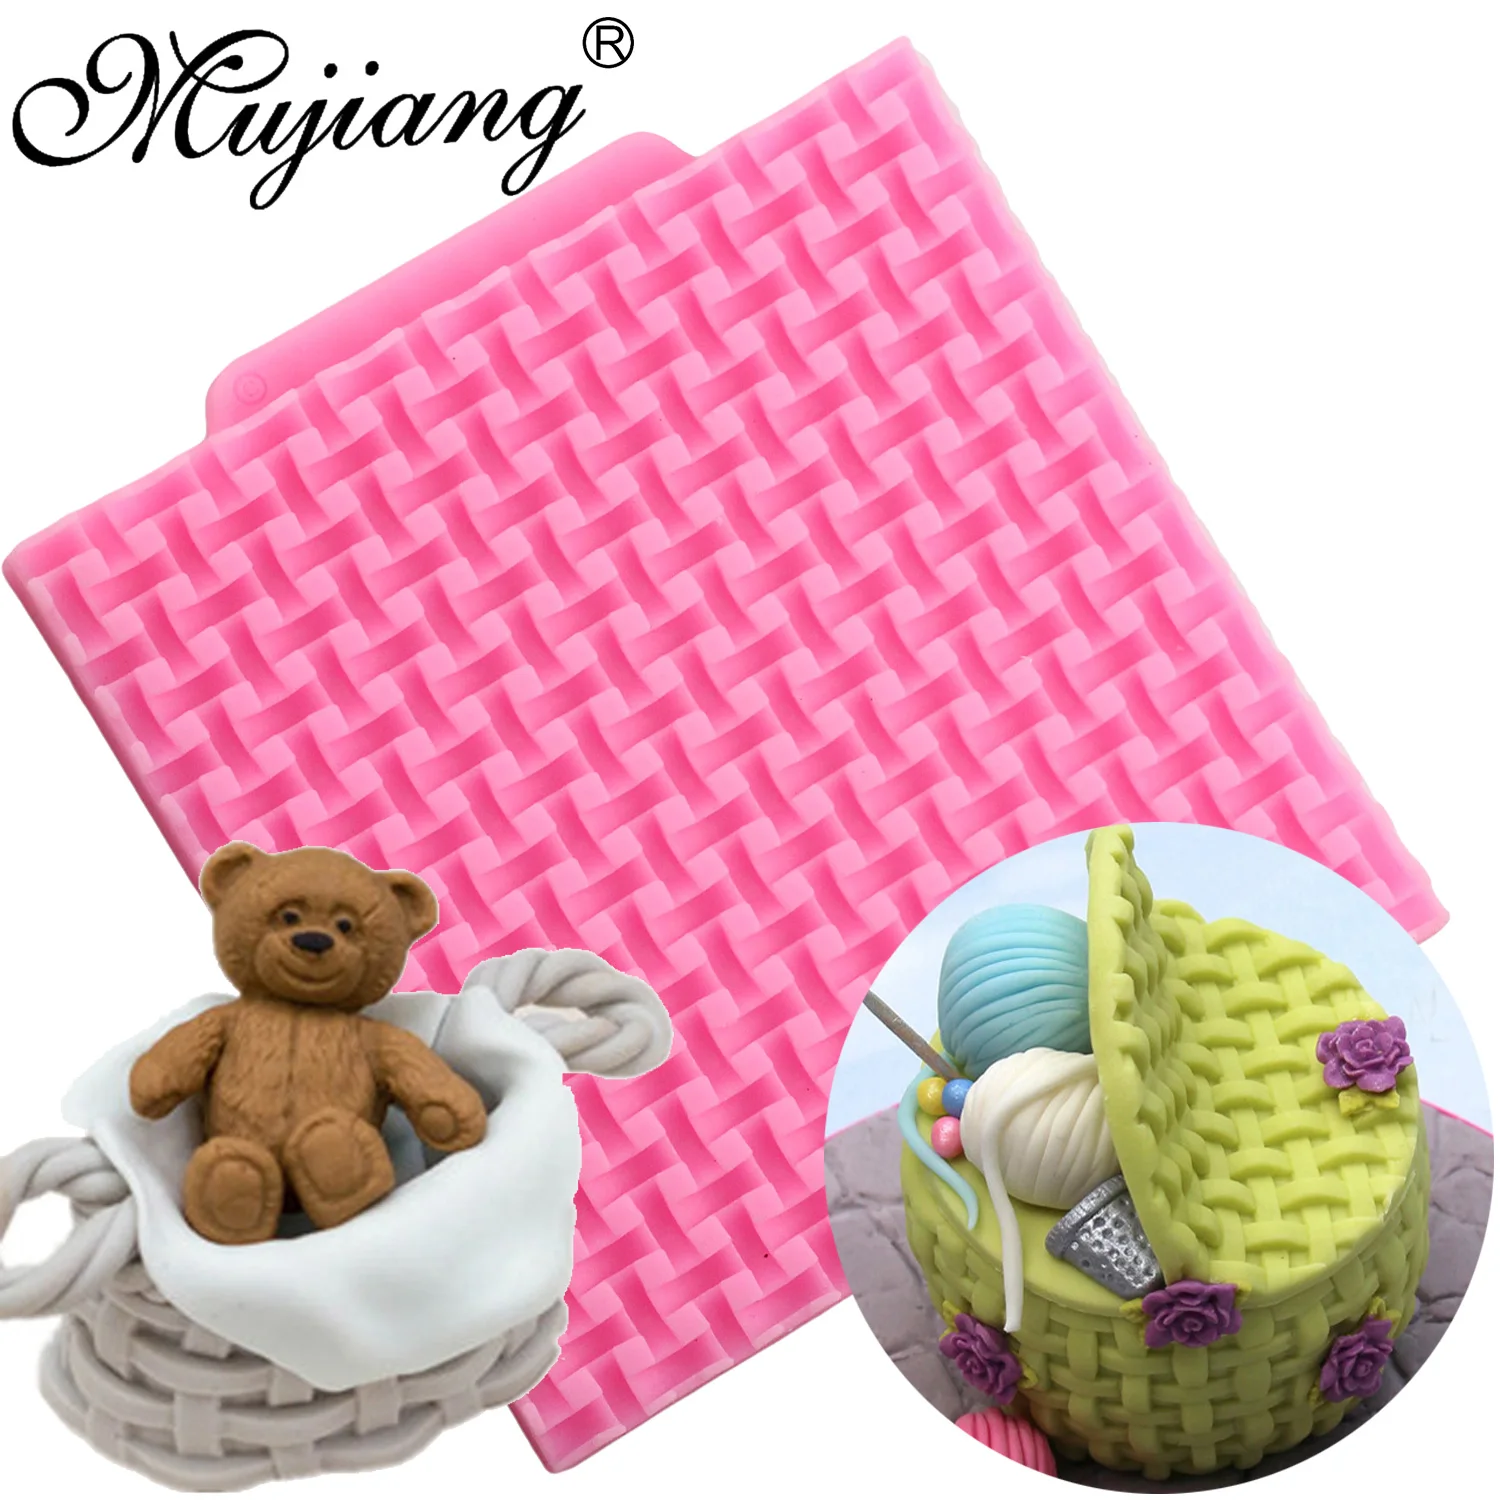 

Mujiang Fence Grid Cake Border Silicone Molds Cupcake Fondant Cake Decorating Tools Sugar Paste Chocolate Candy Moulds